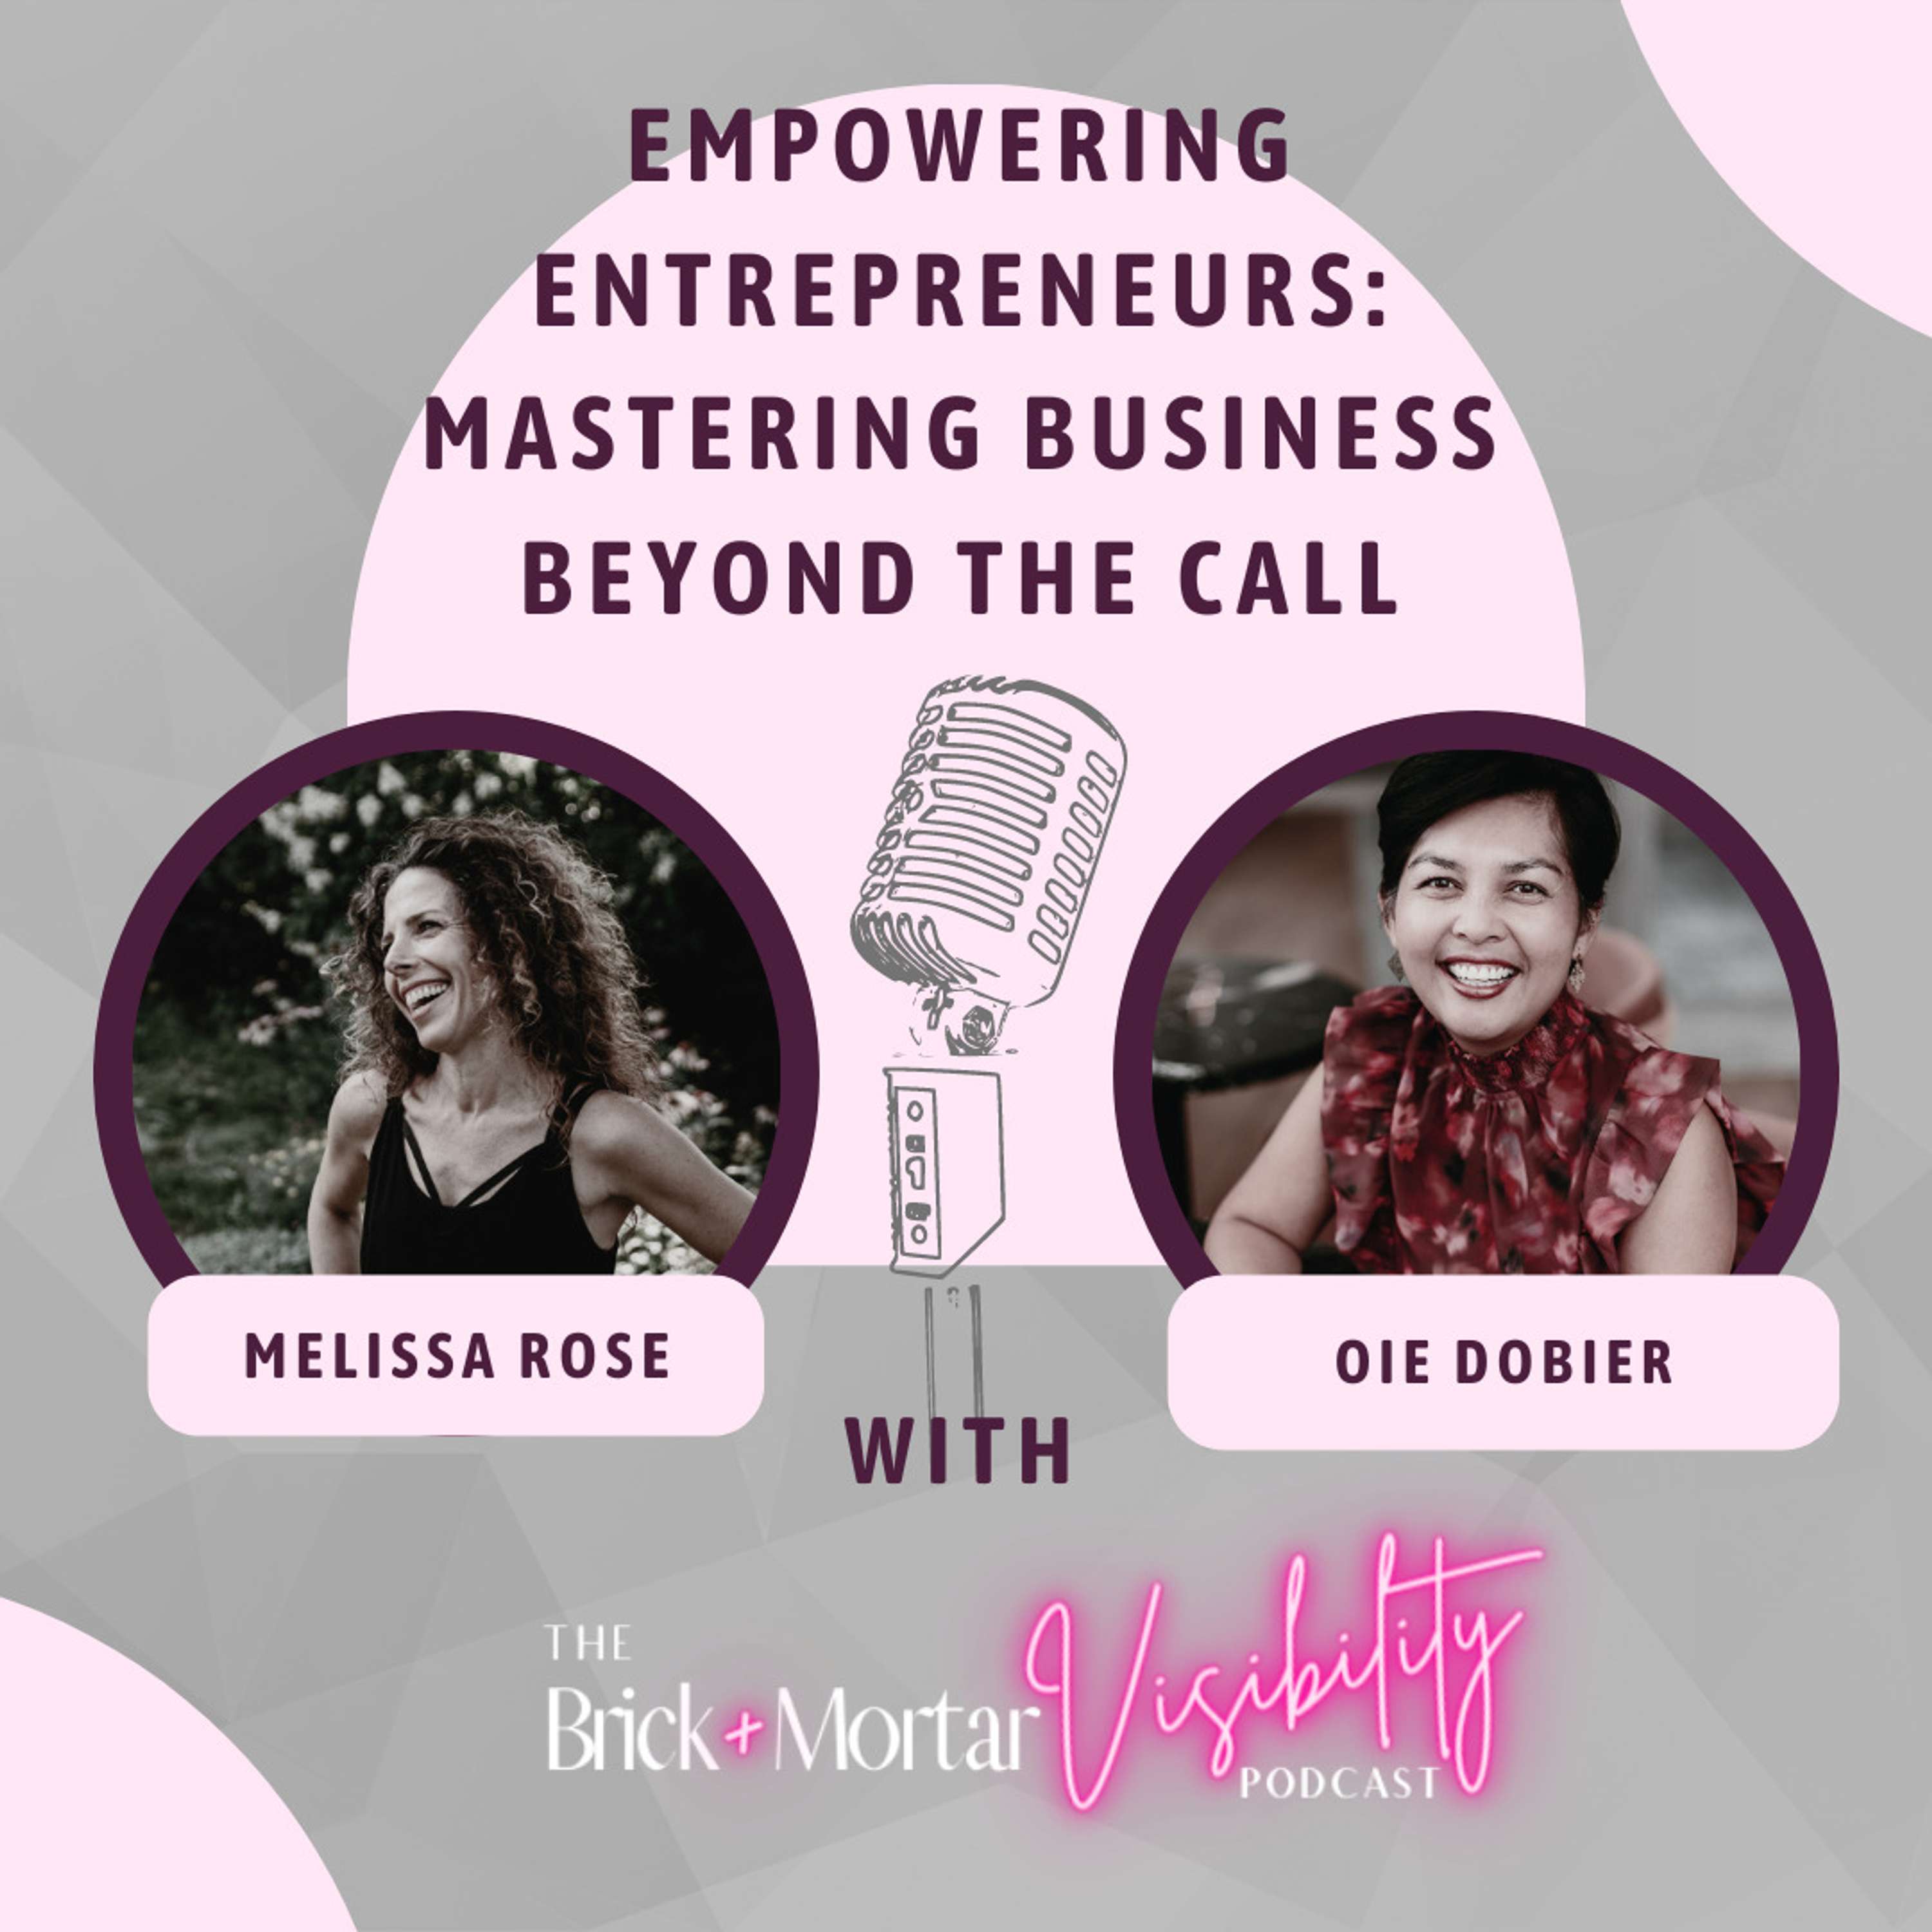 Empowering Entrepreneurs: Mastering Business Beyond the Call with  Oie Dobier